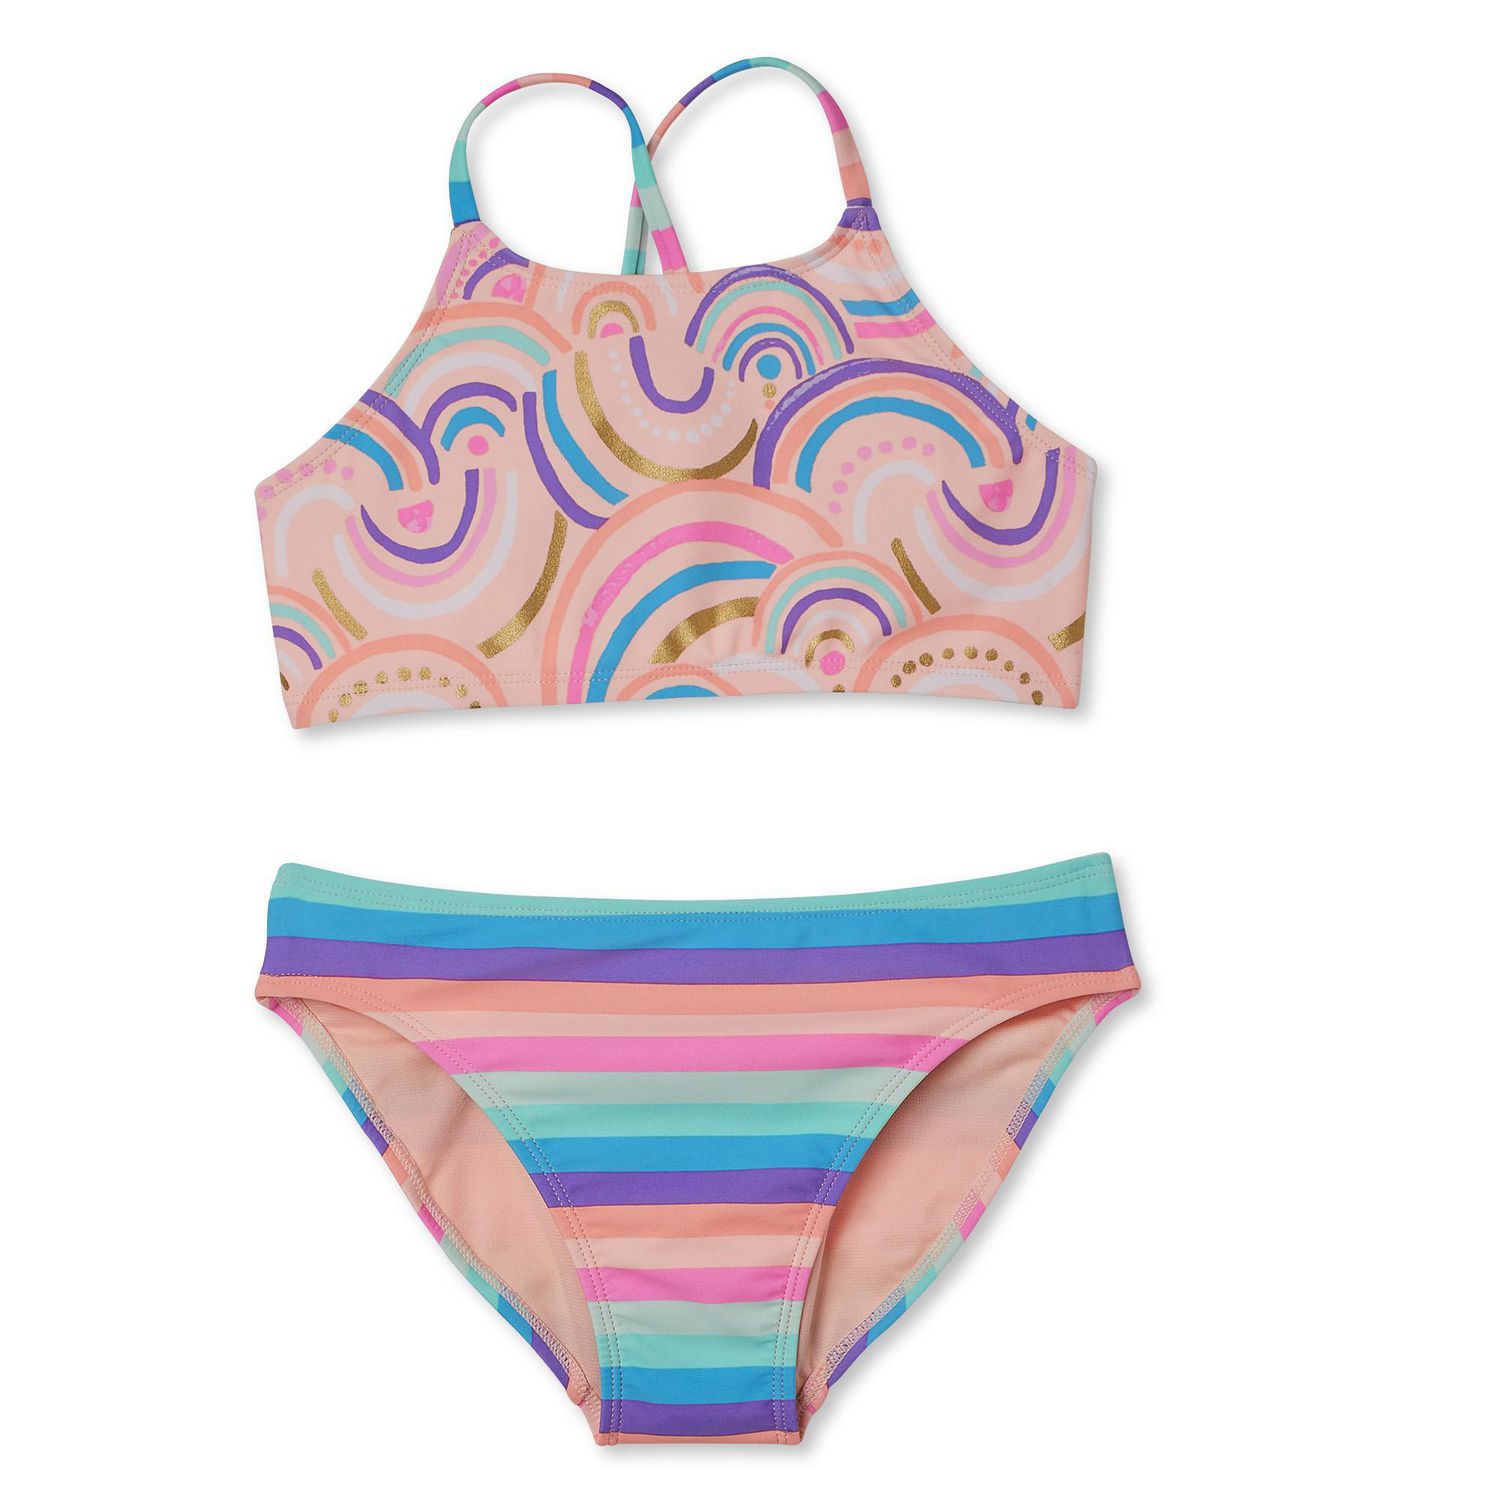 George Girls' Printed Two-Piece Swimsuit | Walmart Canada